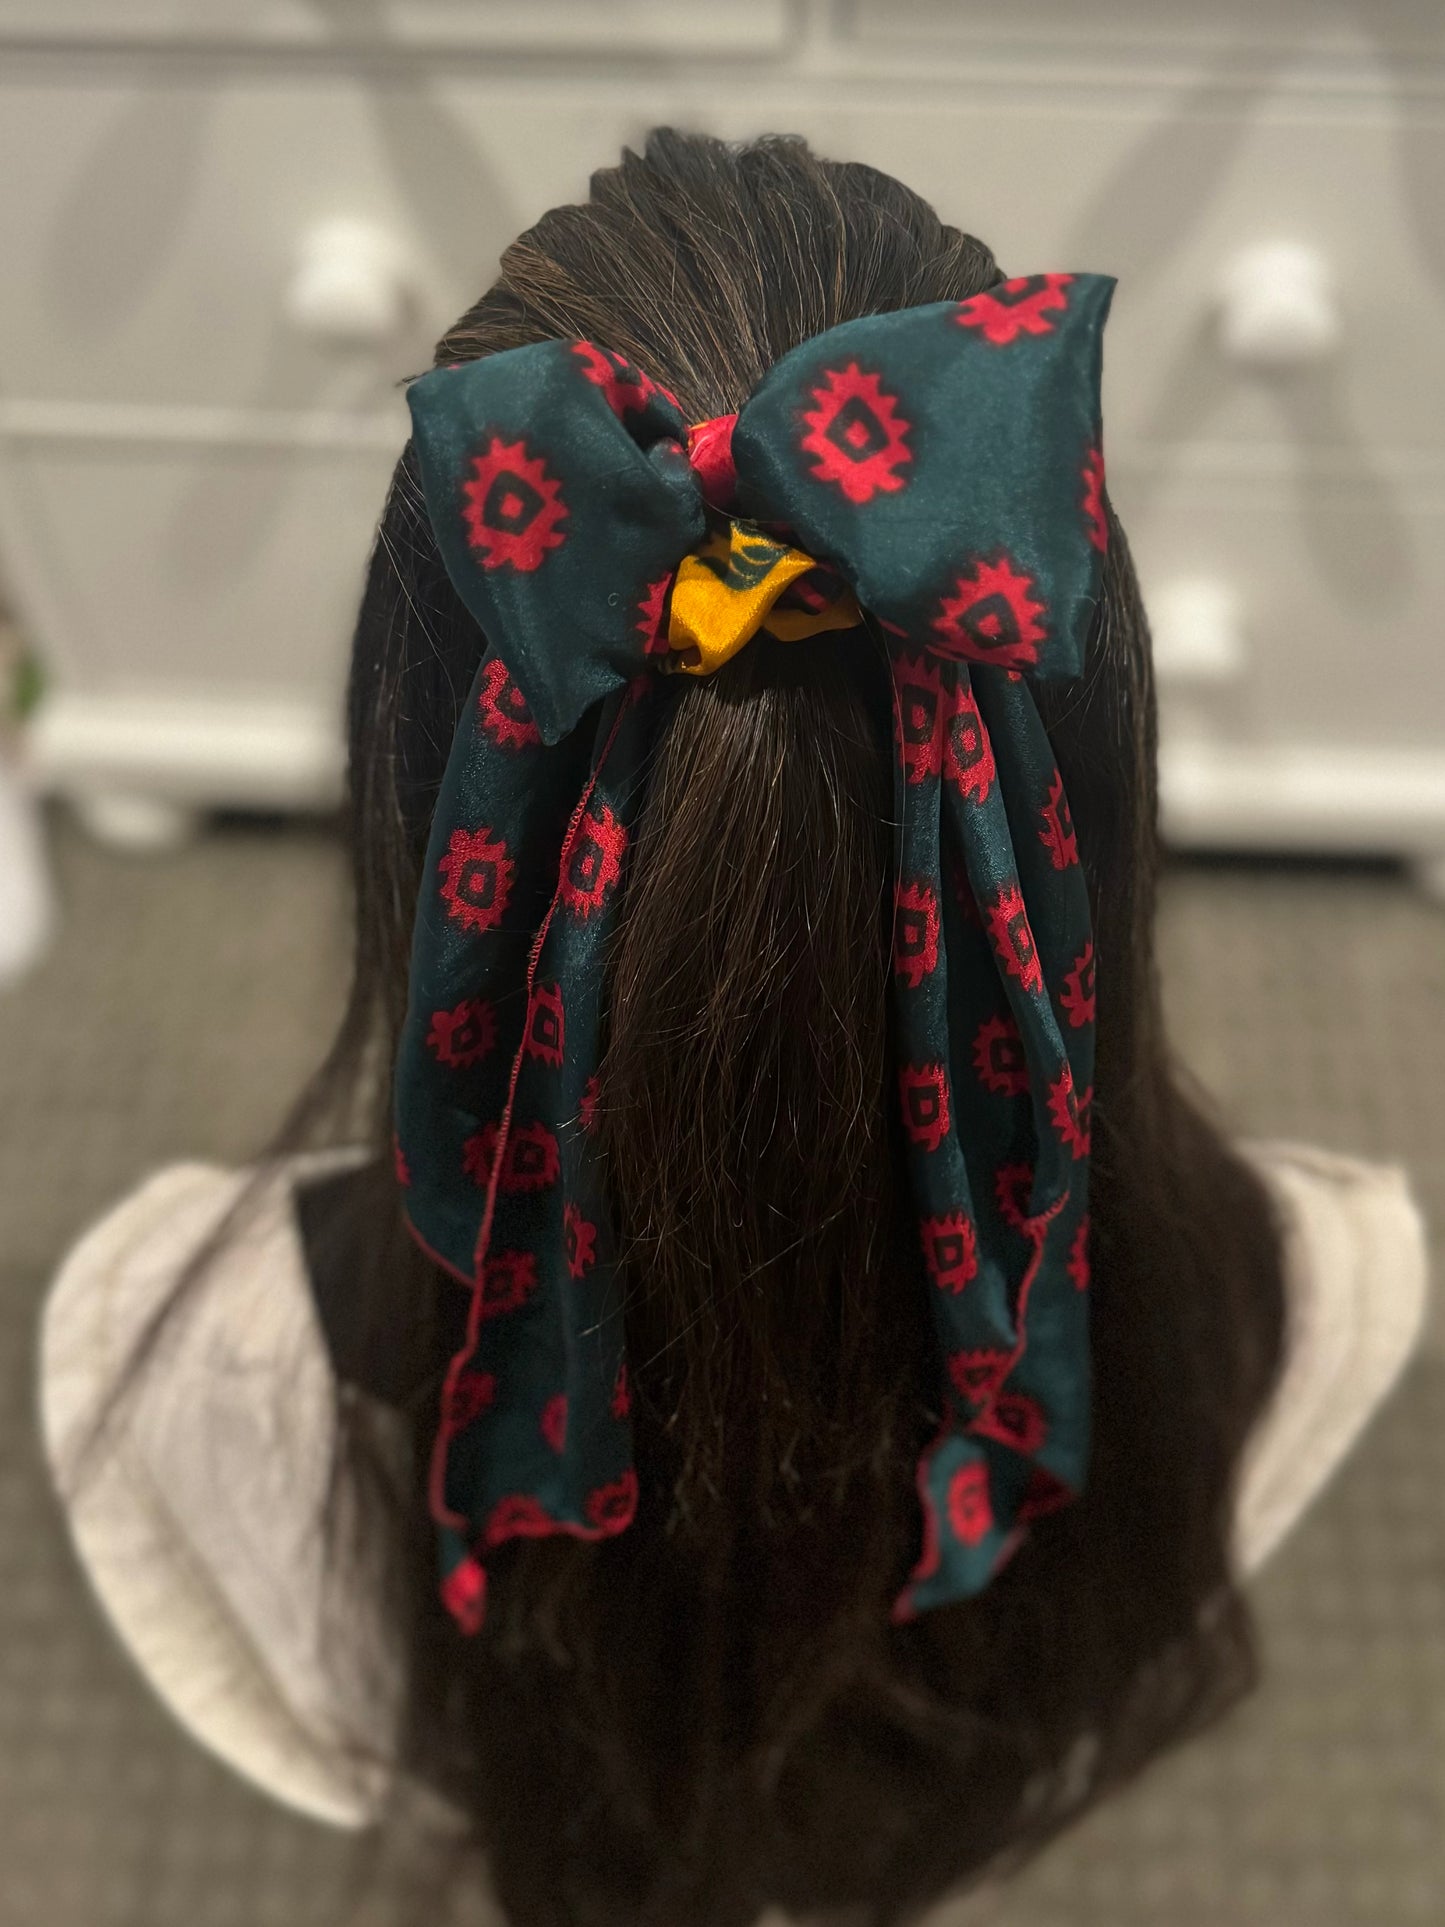 Upcycled Hair Accessorries